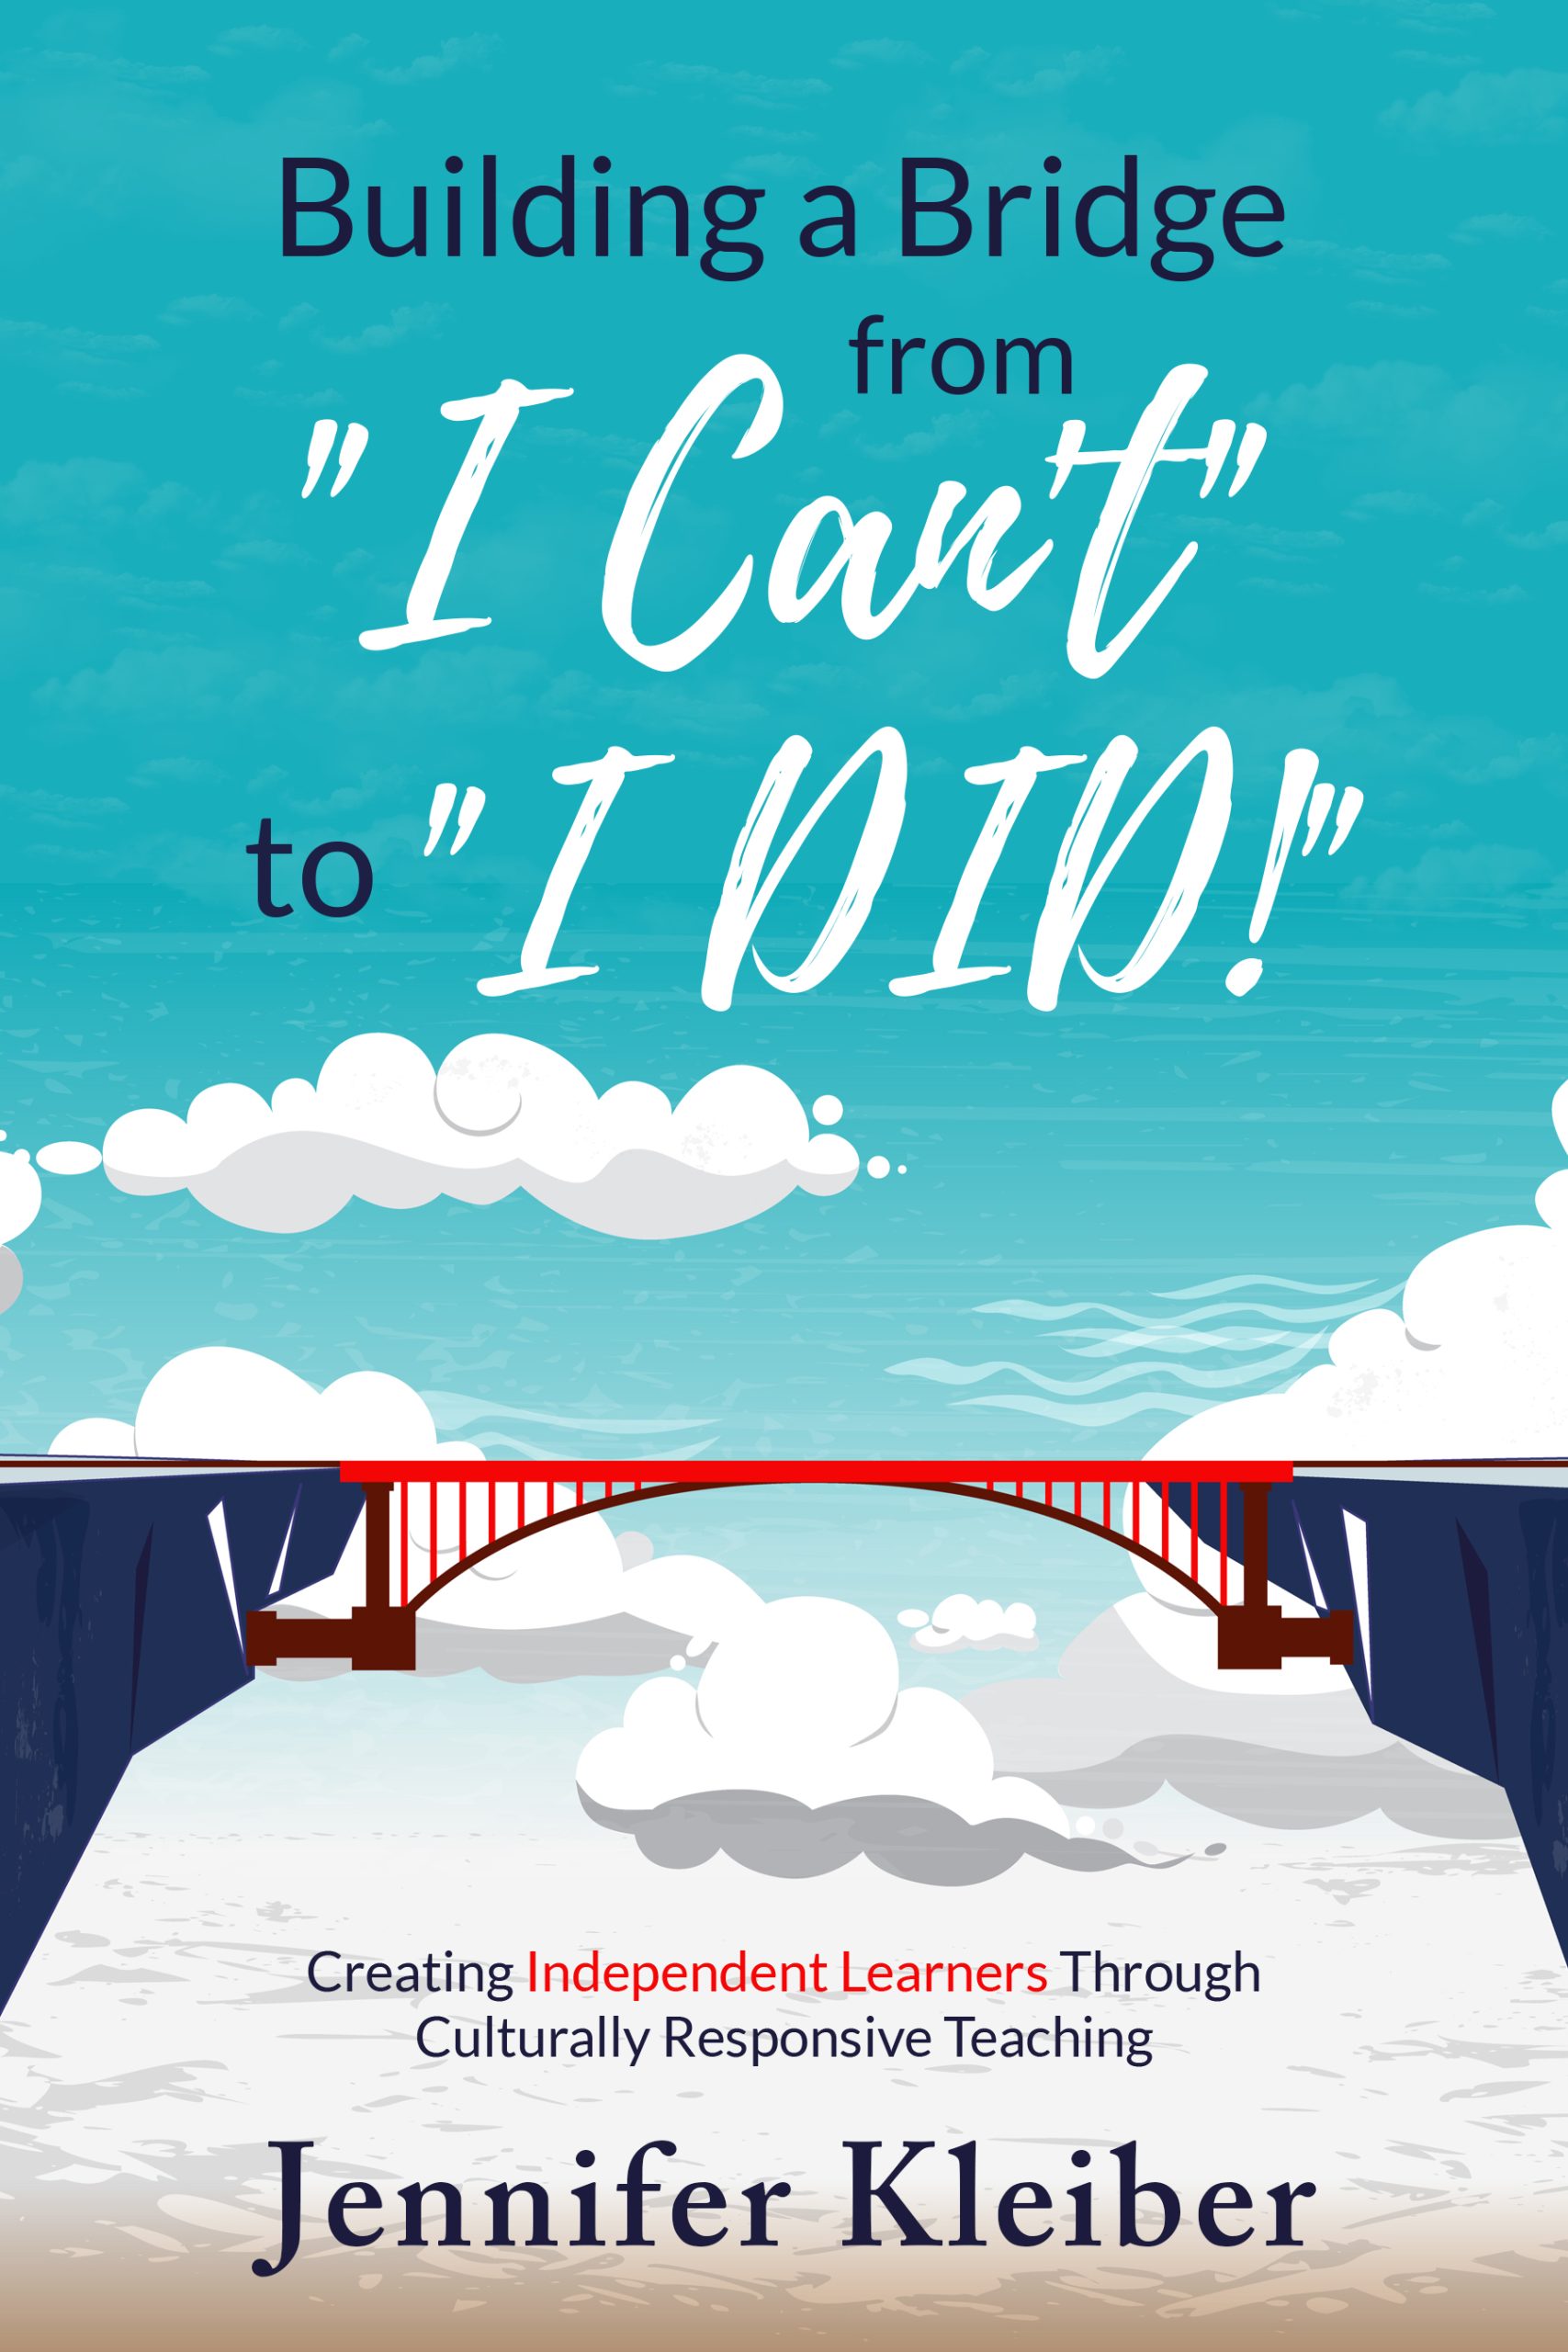 An illustration of a bridge that spans an expansive length between two cliffs. The title Building a Bridge from "I Can't" to "I Did!" is on the top half of the cover overlaying the sky. Below the bridge, overlaying more clouds is the subtitle Creating Independent Learners Through Culturally Responsive Teaching. 